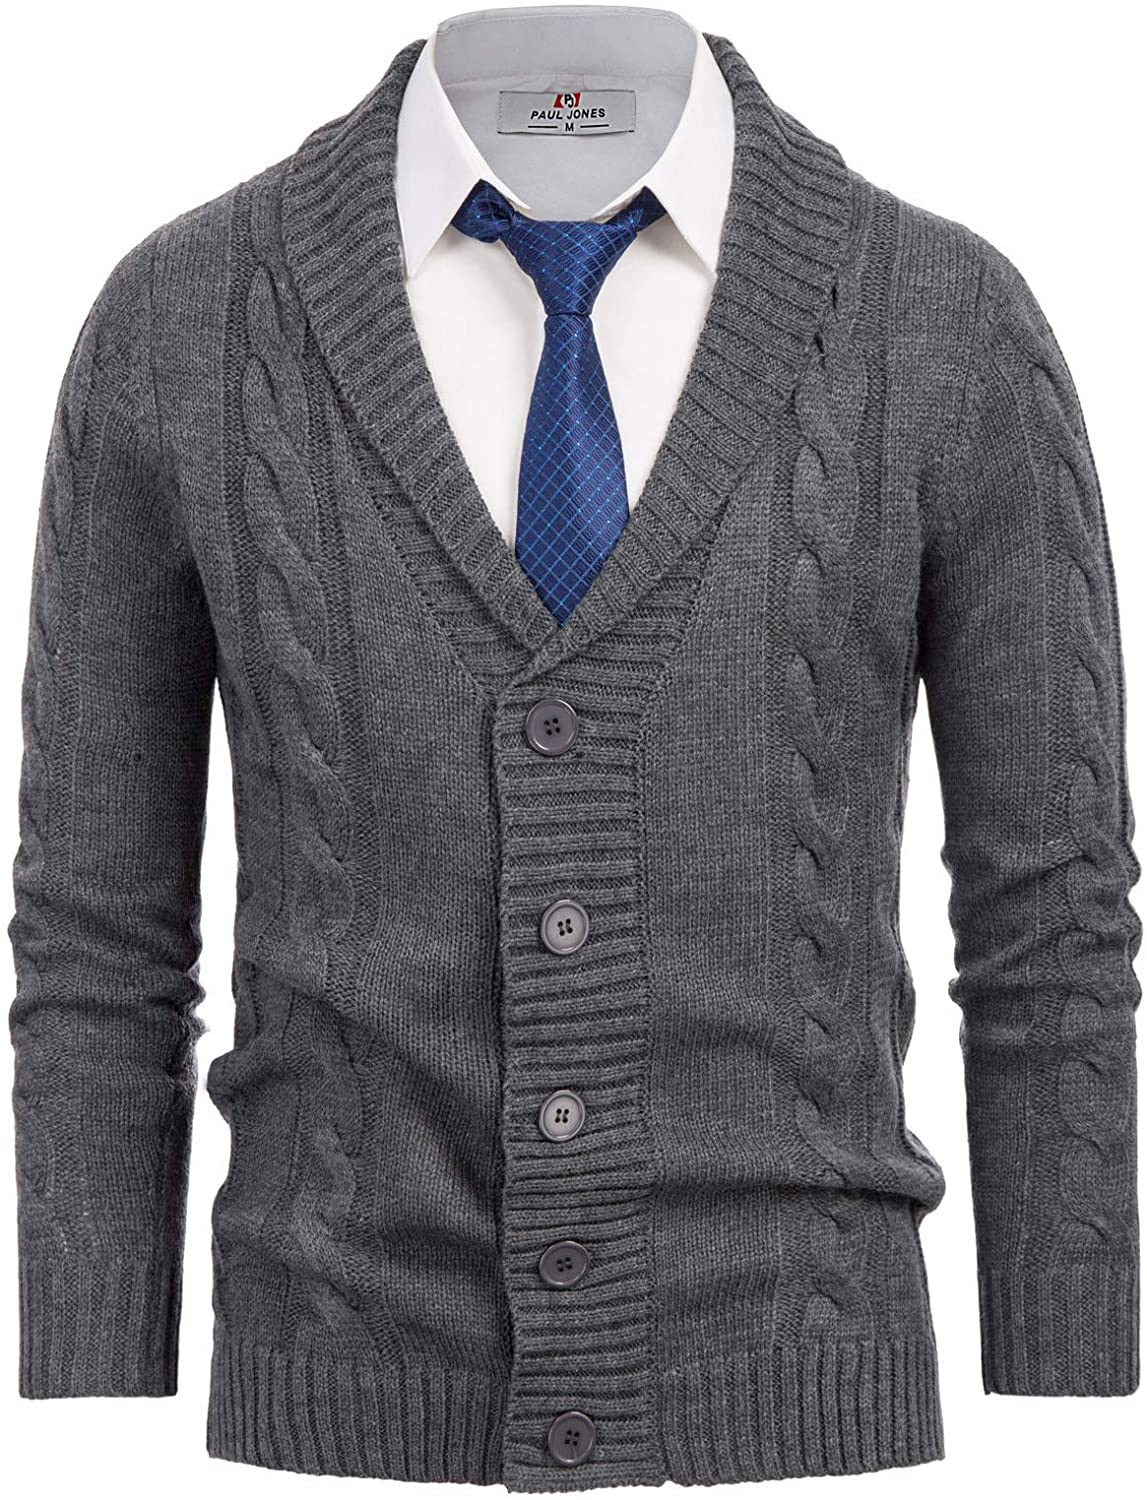 Mens Shawl Collar Cardigan Sweater Cable Knit Button Cotton Sweater with Pockets